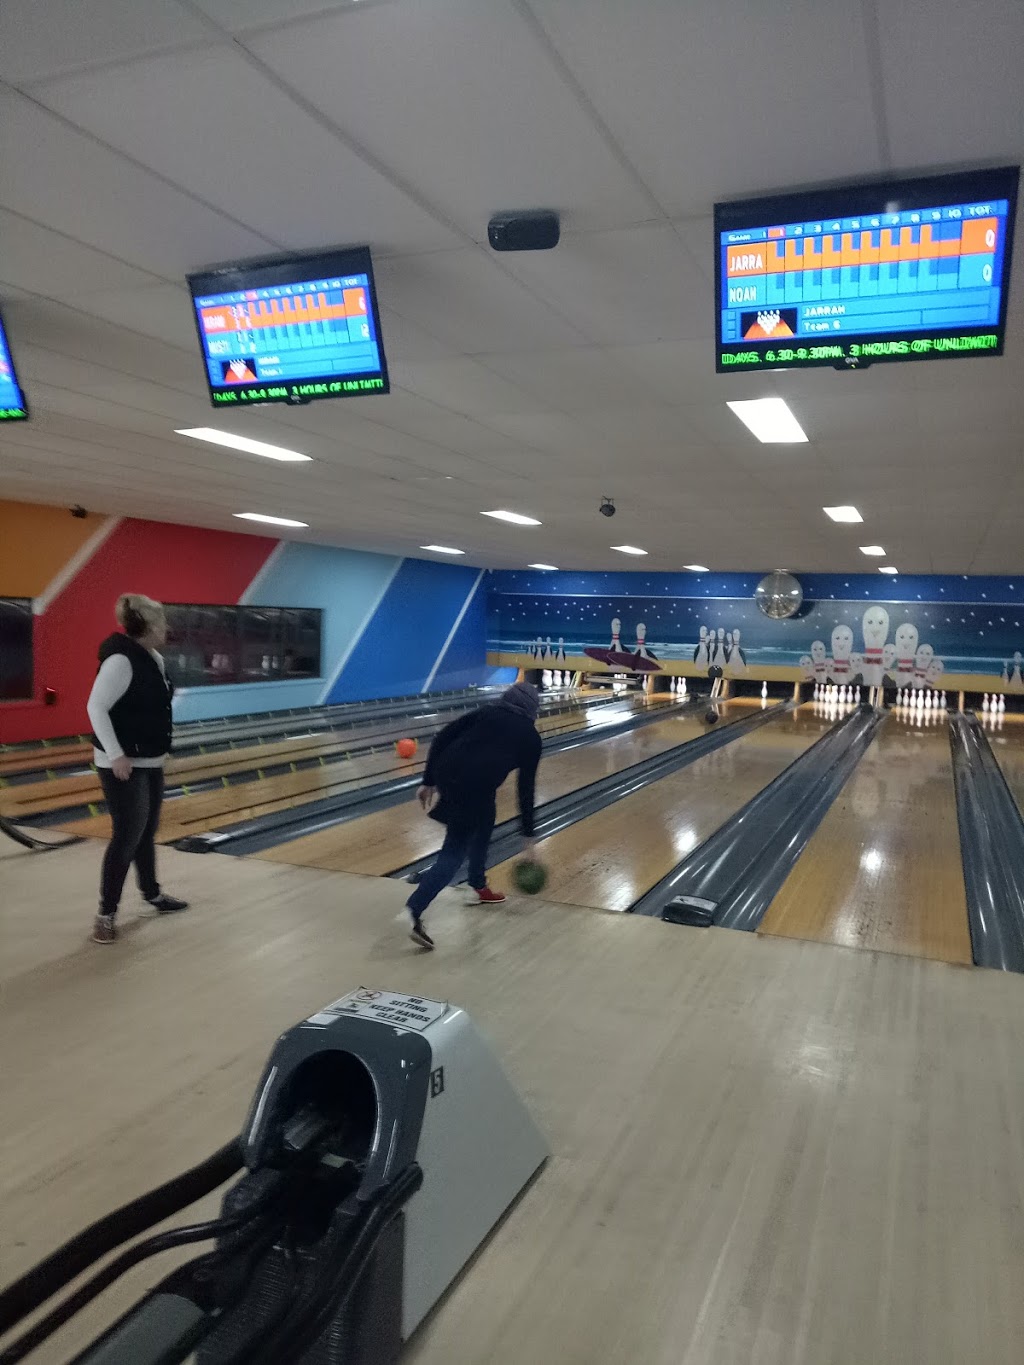 Phillip Island Ten Pin Bowling and Entertainment | bowling alley | 91-97 Settlement Rd, Cowes VIC 3922, Australia | 0359523977 OR +61 3 5952 3977